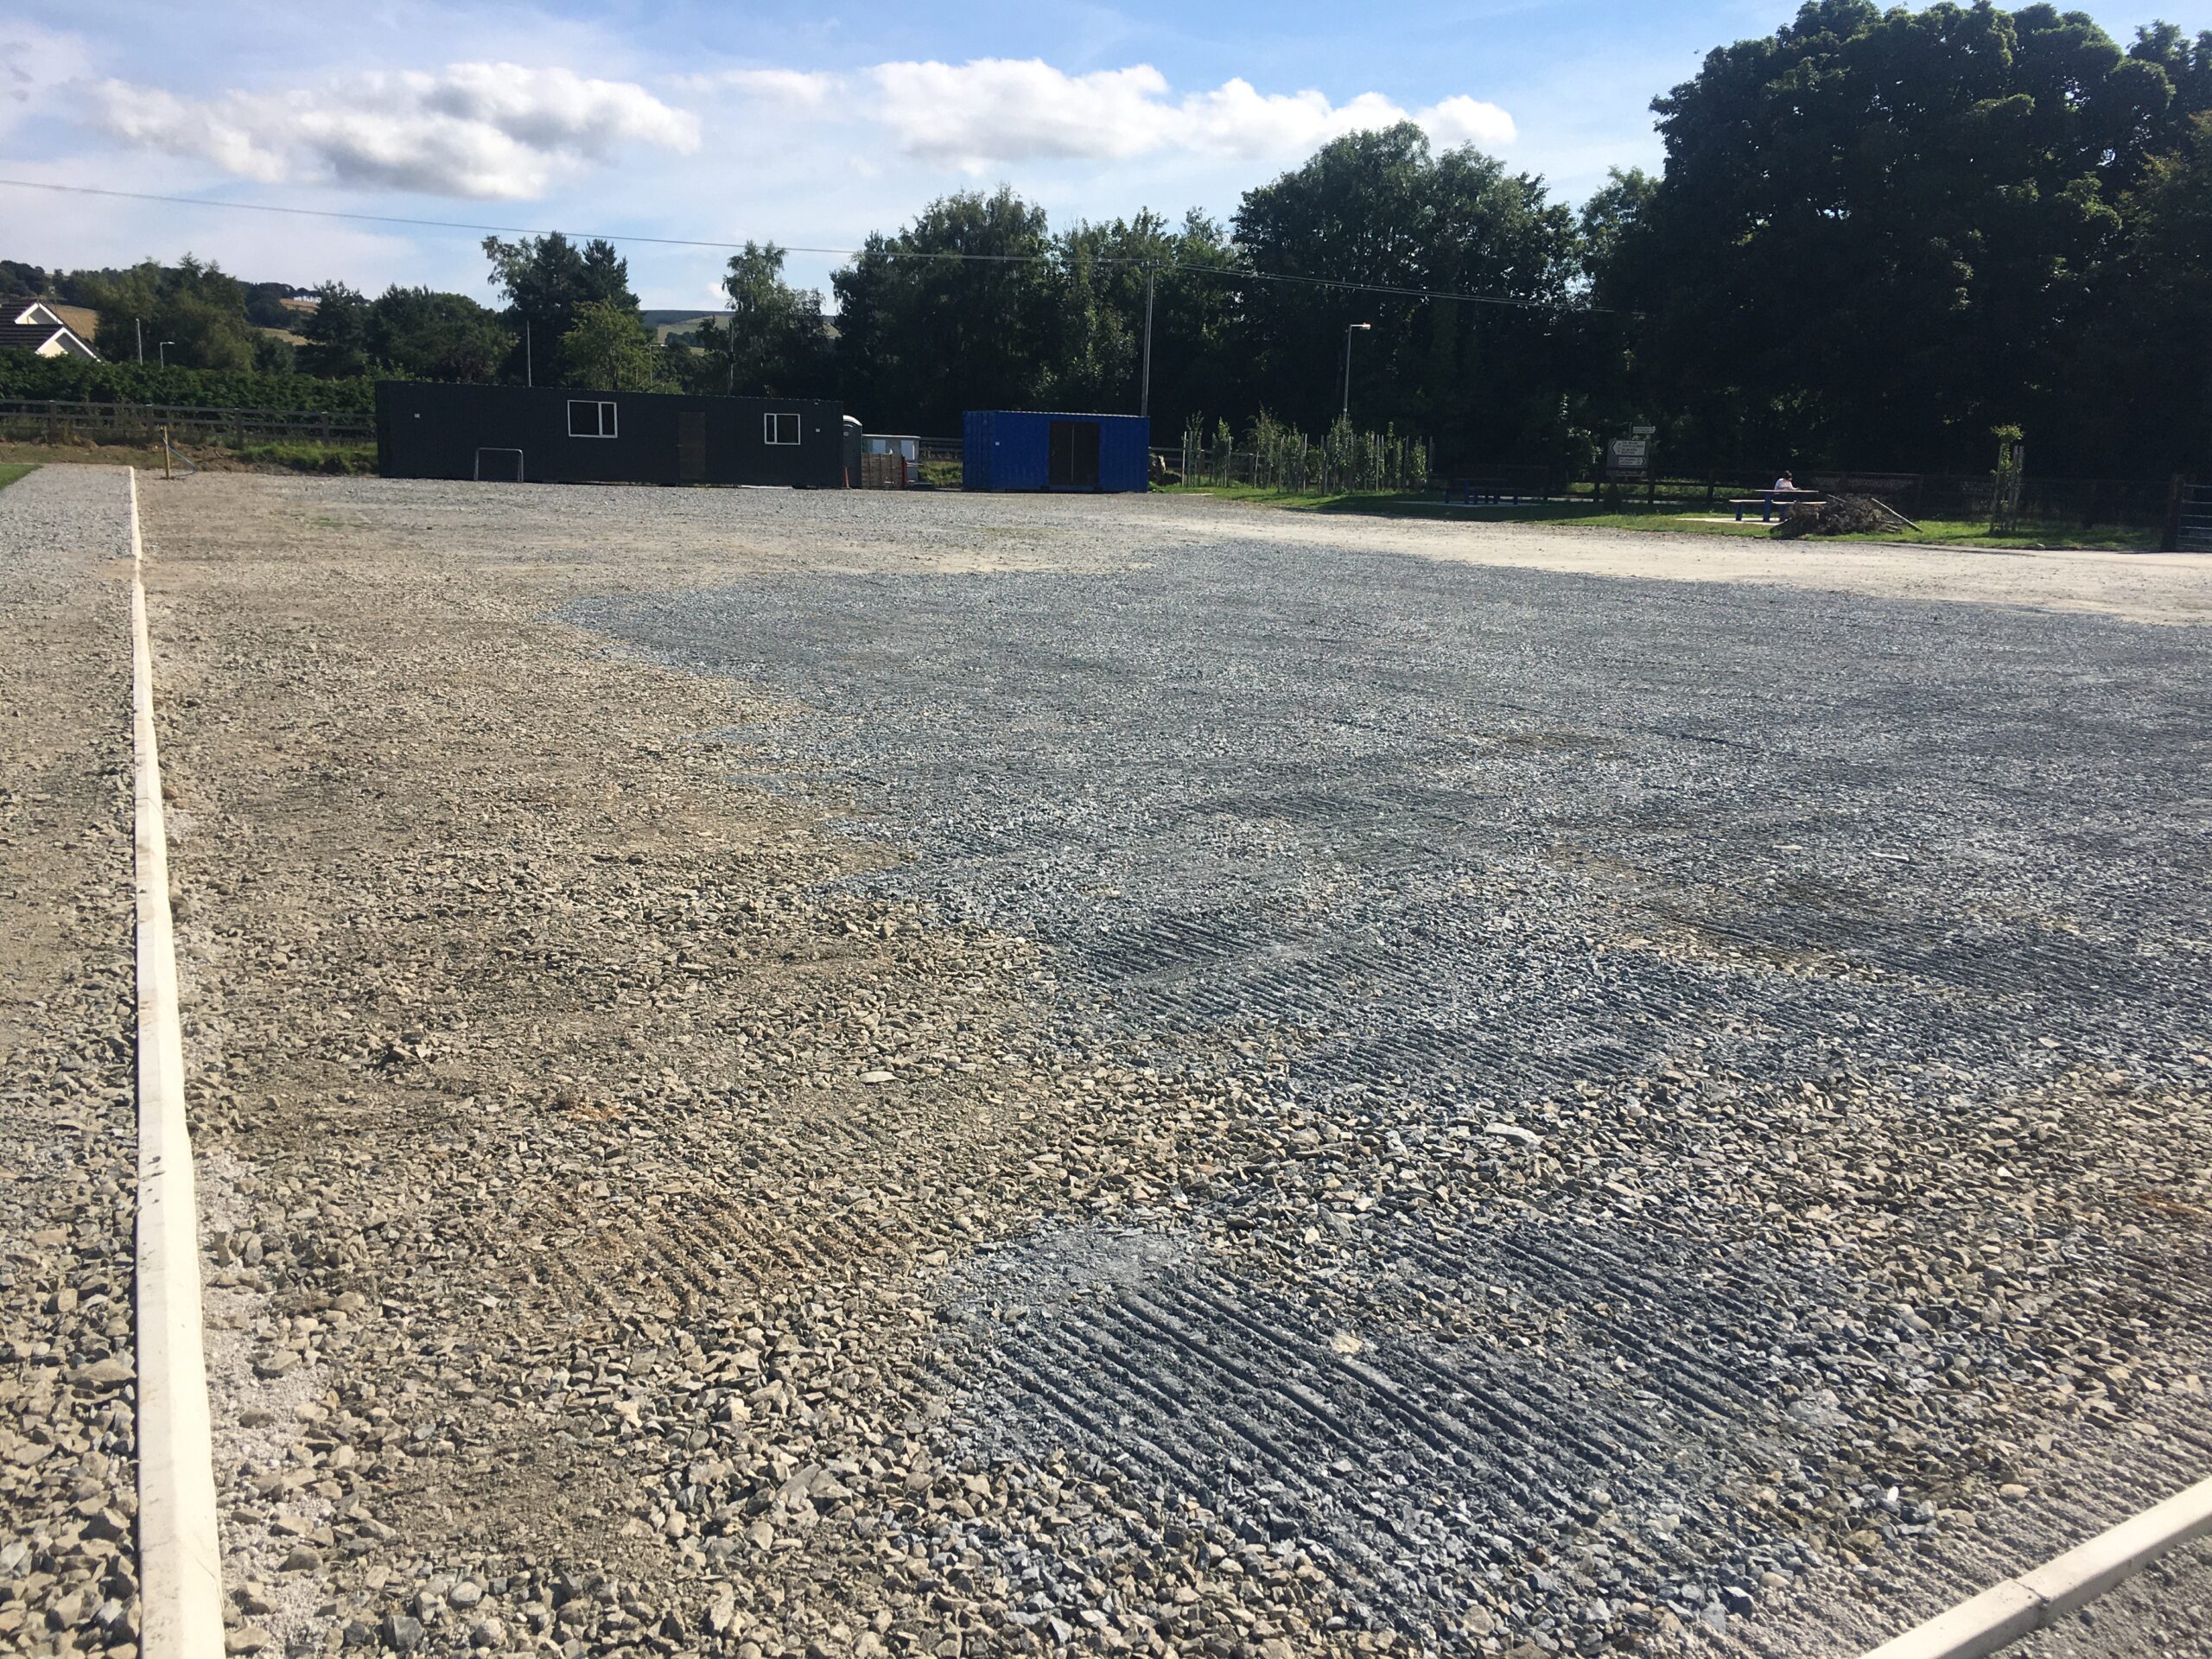 What a job…car park, pitch levelled and walking track completed.